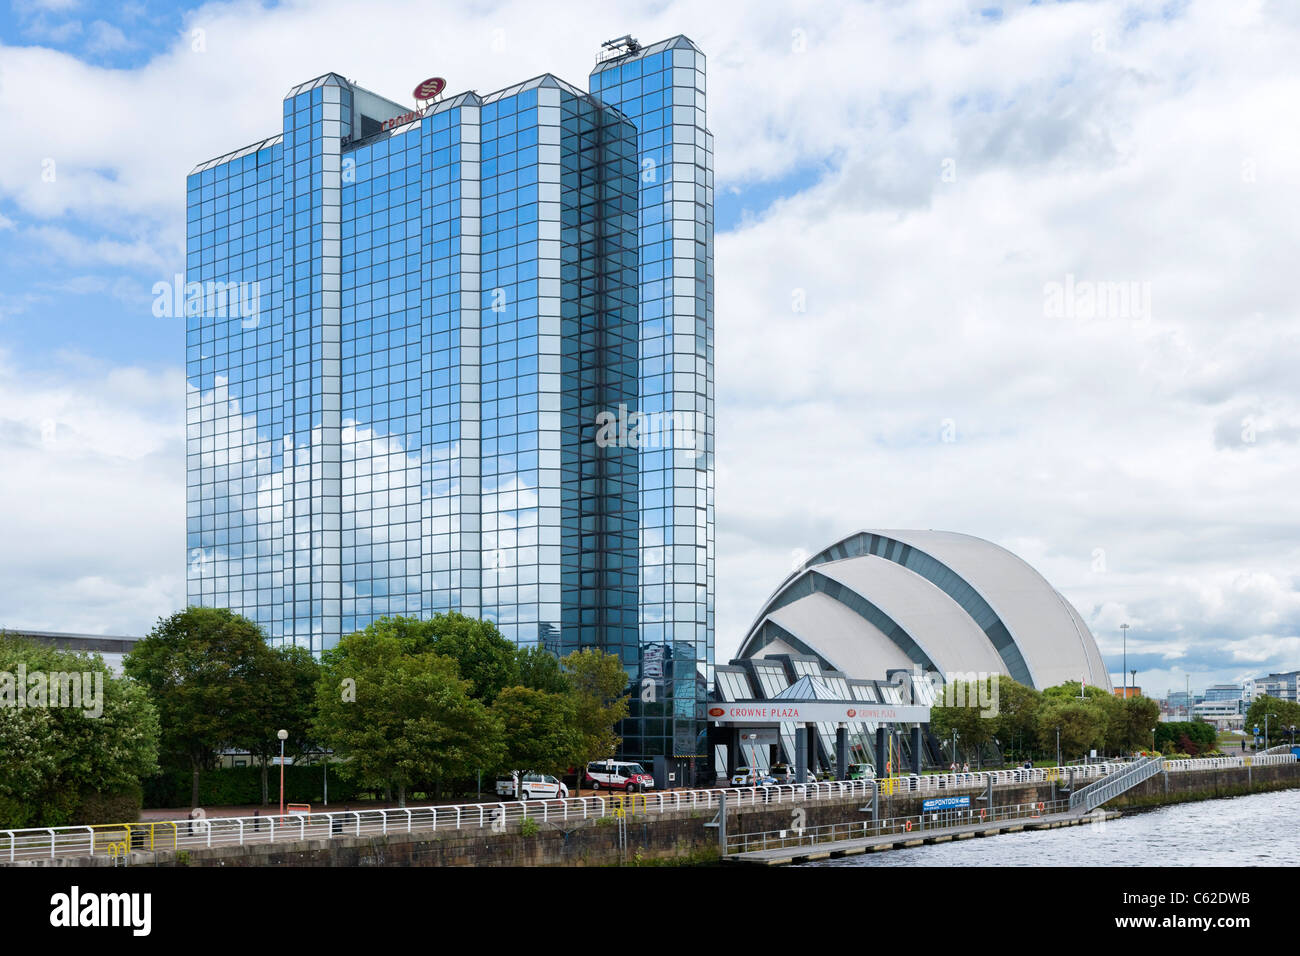 The Crowne Plaza Hotel with 'The Armadillo' (The Clyde Auditorium) behind, River Clyde, Glasgow, Scotland, UK Stock Photo